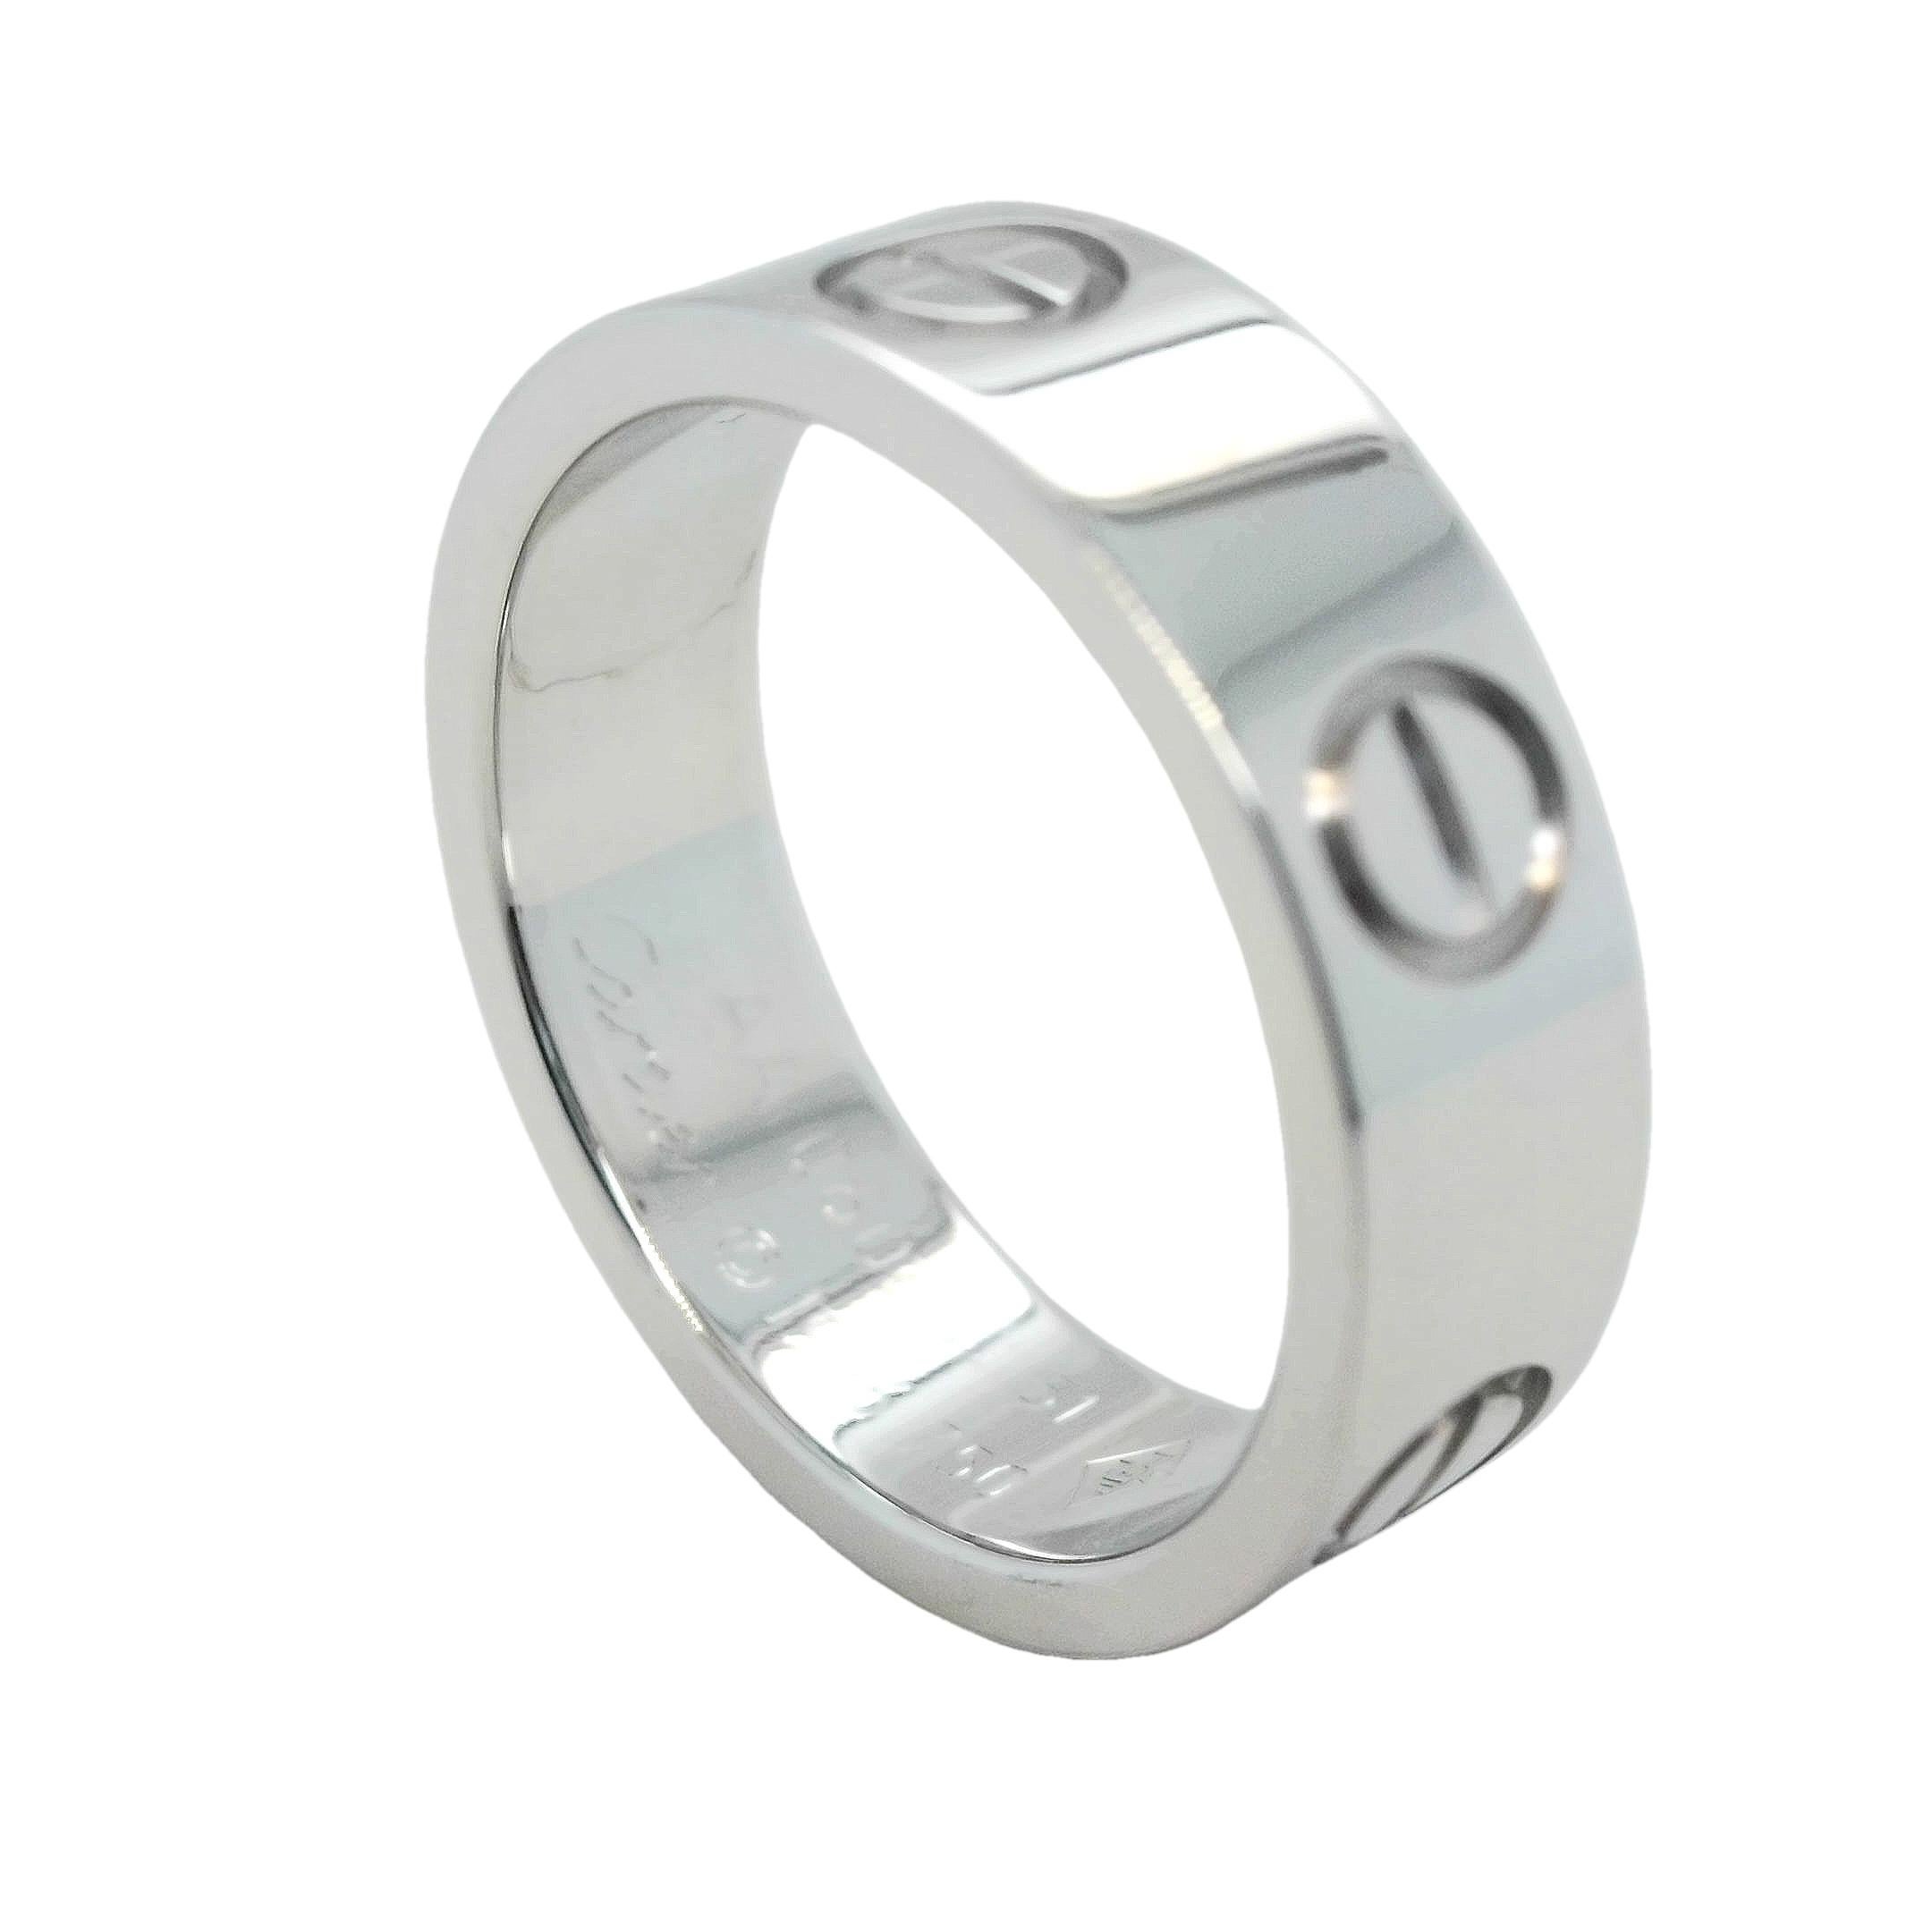 Cartier Love ring White gold 5.5mm model number B4084752 In Excellent Condition For Sale In Addlestone, GB